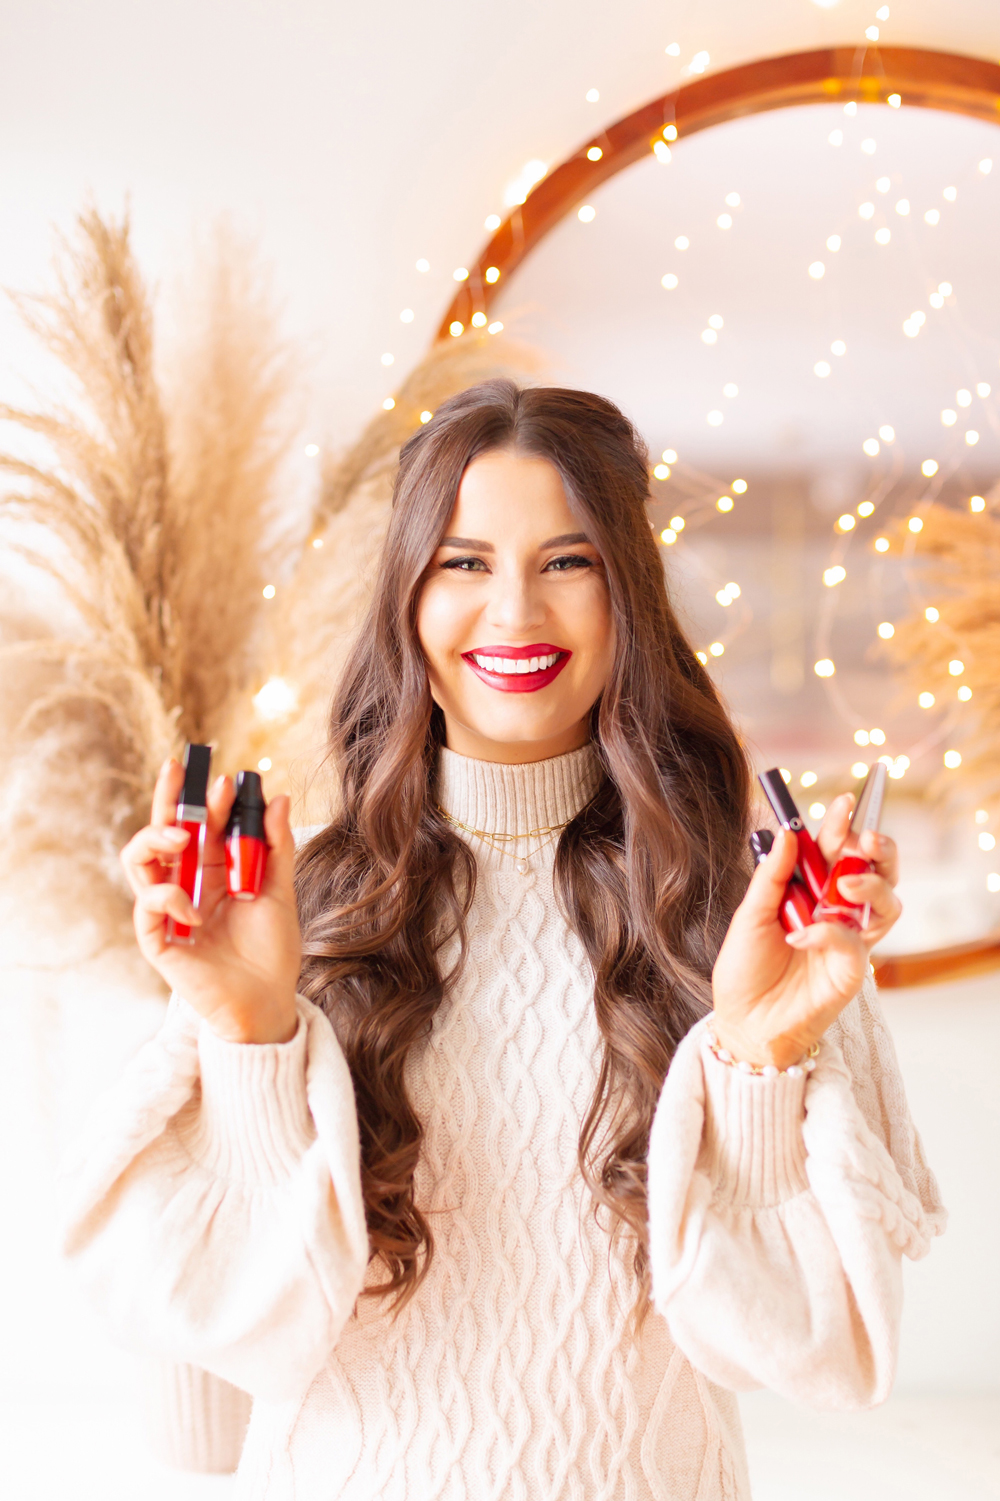 My Top 5 Red Lipsticks for the Holidays | The Best Luxury Lipsticks for Christmas 2021 photos, review, swatches | Brunette woman wearing a red lipstick and cable kit sweater dress in a festive holiday setting with bokeh lights | Best universal red lipstick | Best luxury red lipstick | Best red liquid lipstick | Best long lasting red lipstick | Best red lipstick 2021 | Christmas lipstick 2021 | Mask friendly red lipstick | Calgary Beauty Blogger // JustineCelina.com